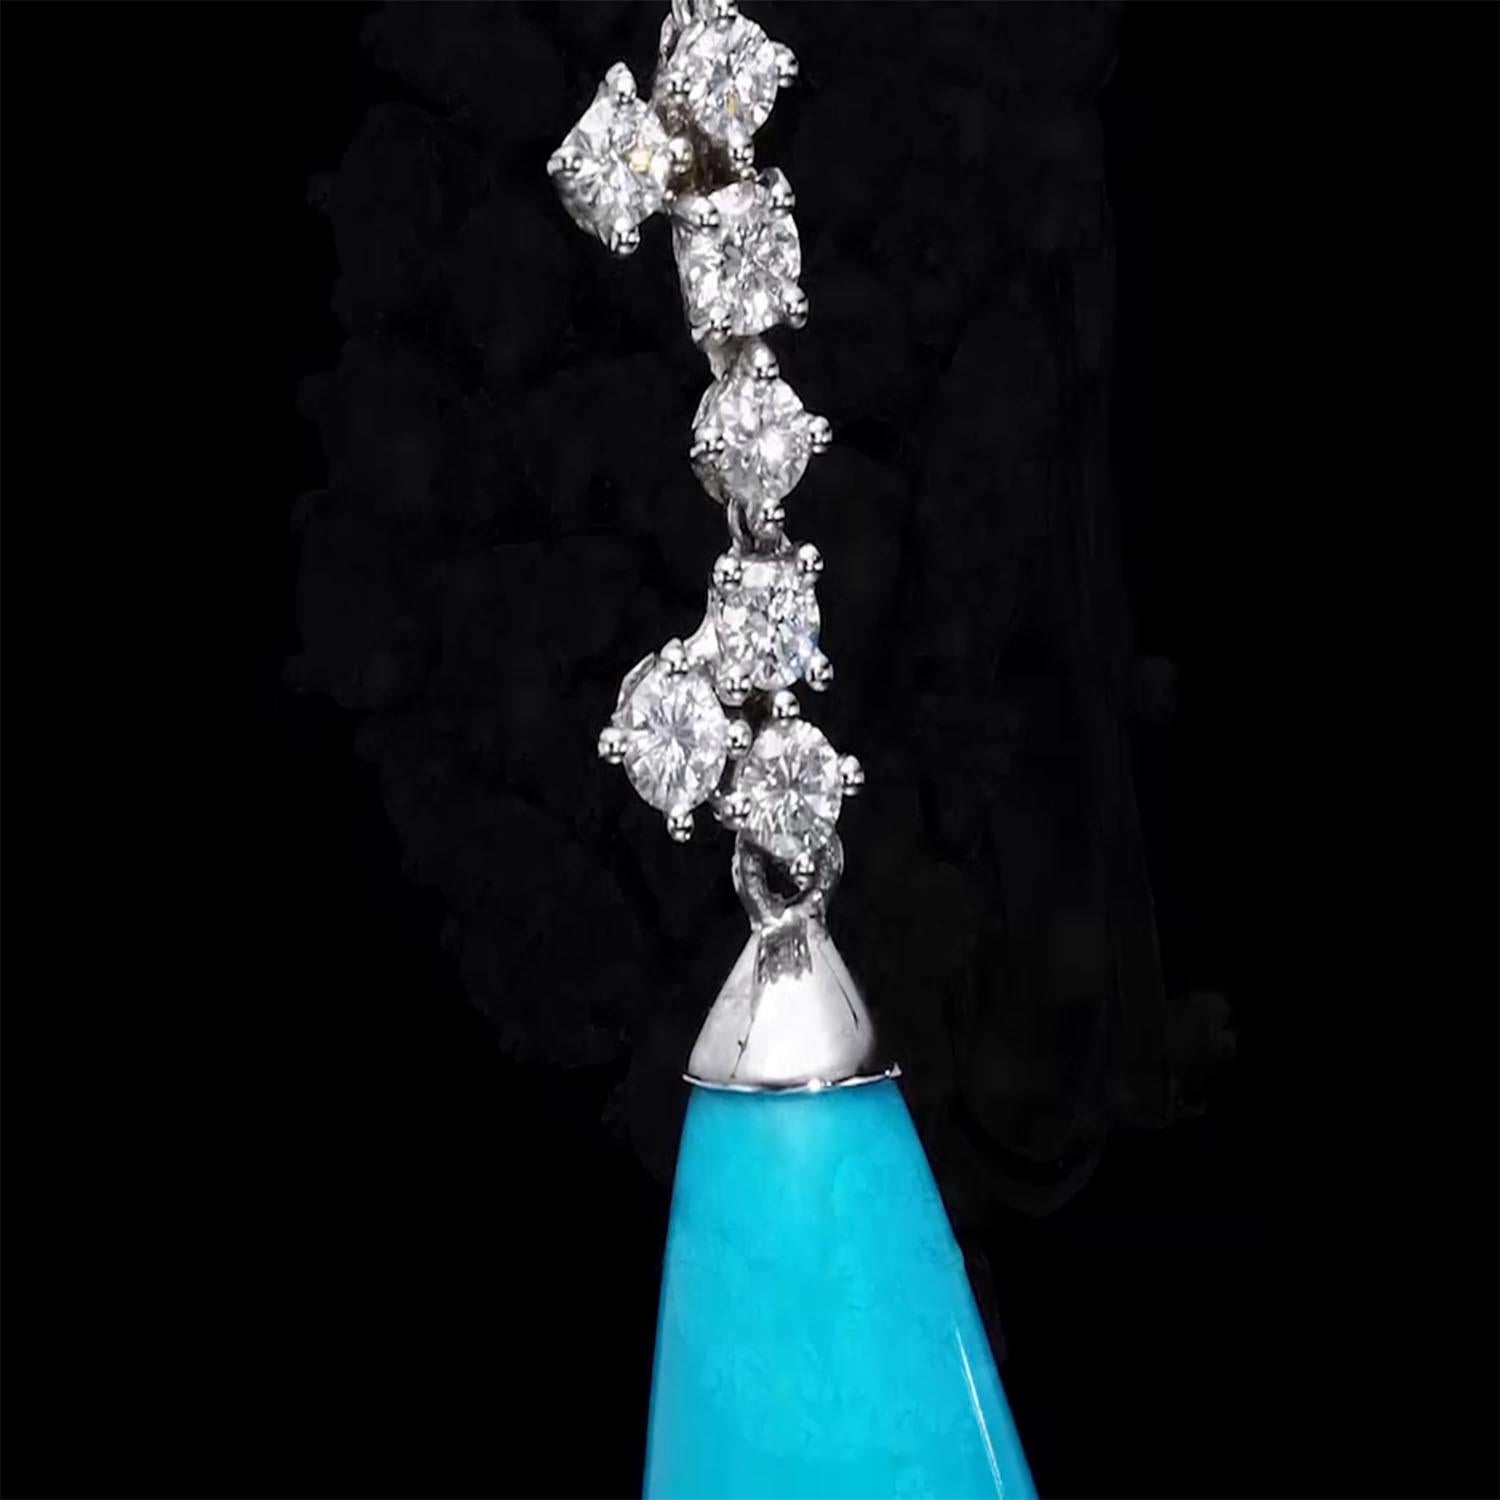 Brilliant Cut 8.20 carat Turquoise Drop Earrings with 4.36 carat Natural Diamonds For Sale